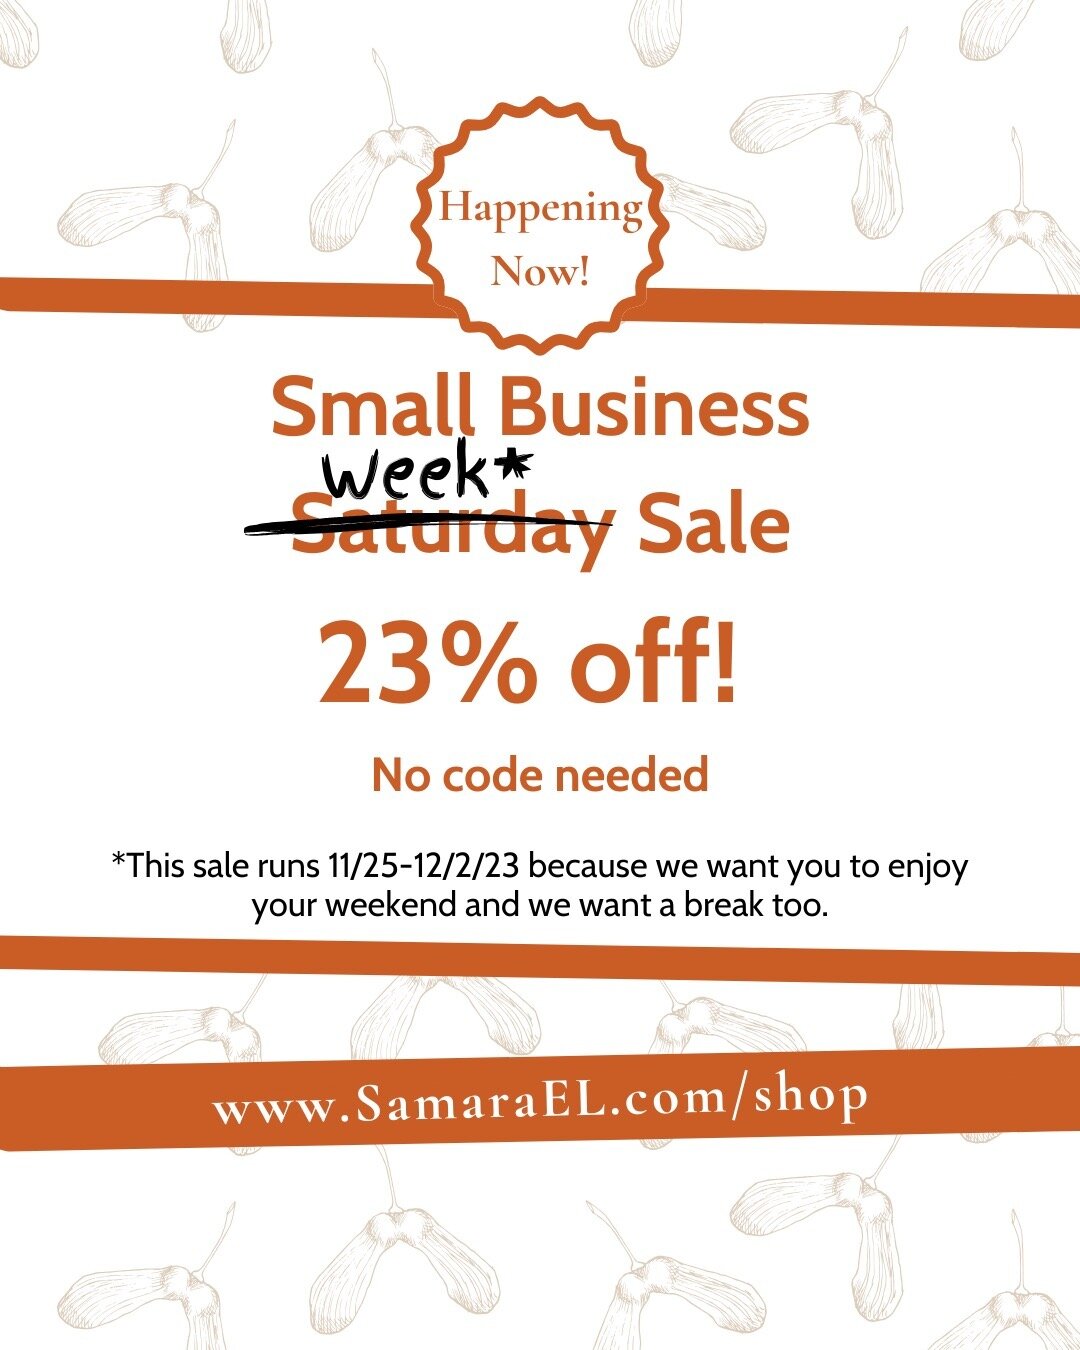 We wanted to celebrate Small Business Saturday and all you do for young children, but wanted you to enjoy your weekend. So&白马王子;

We made it a Small Business WEEK Sale by offering you a 23% discount off everything in the 翅果商店 now through Dec